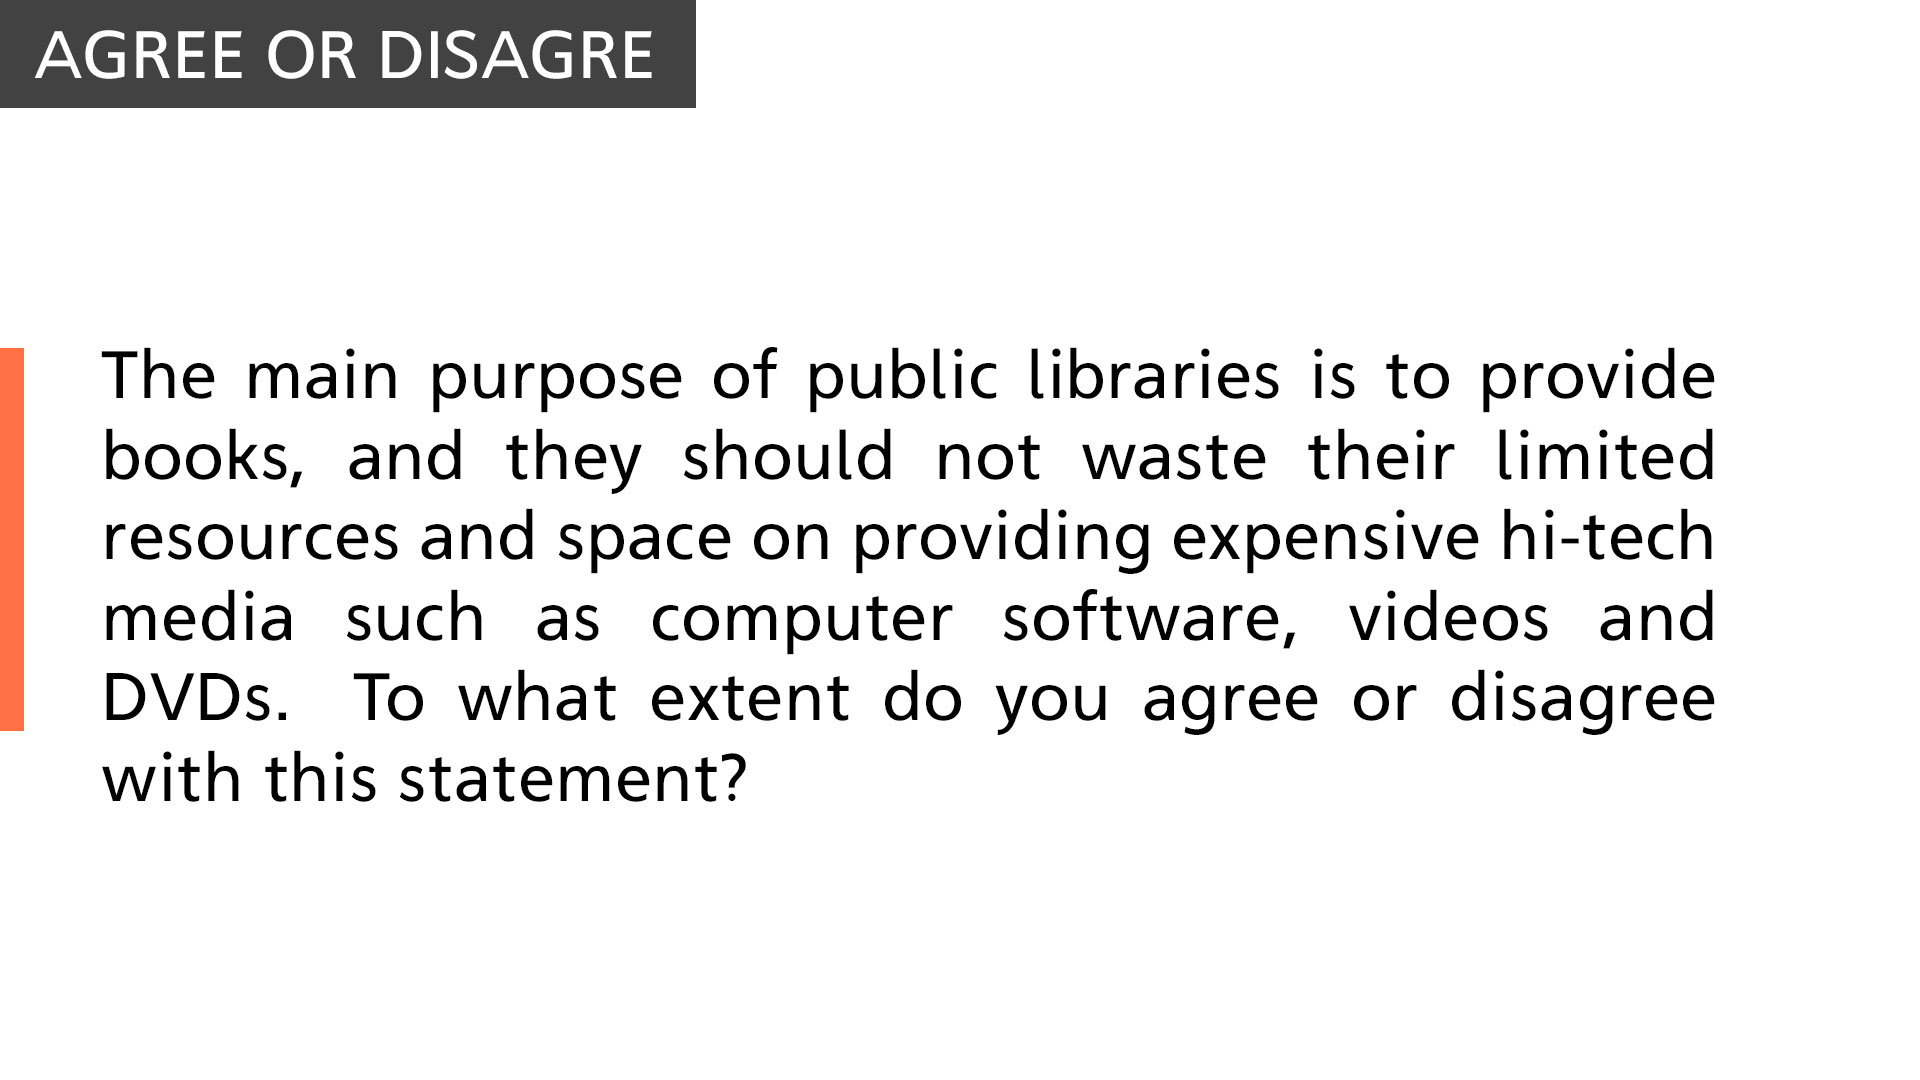 main purpose of public libraries is to provide books